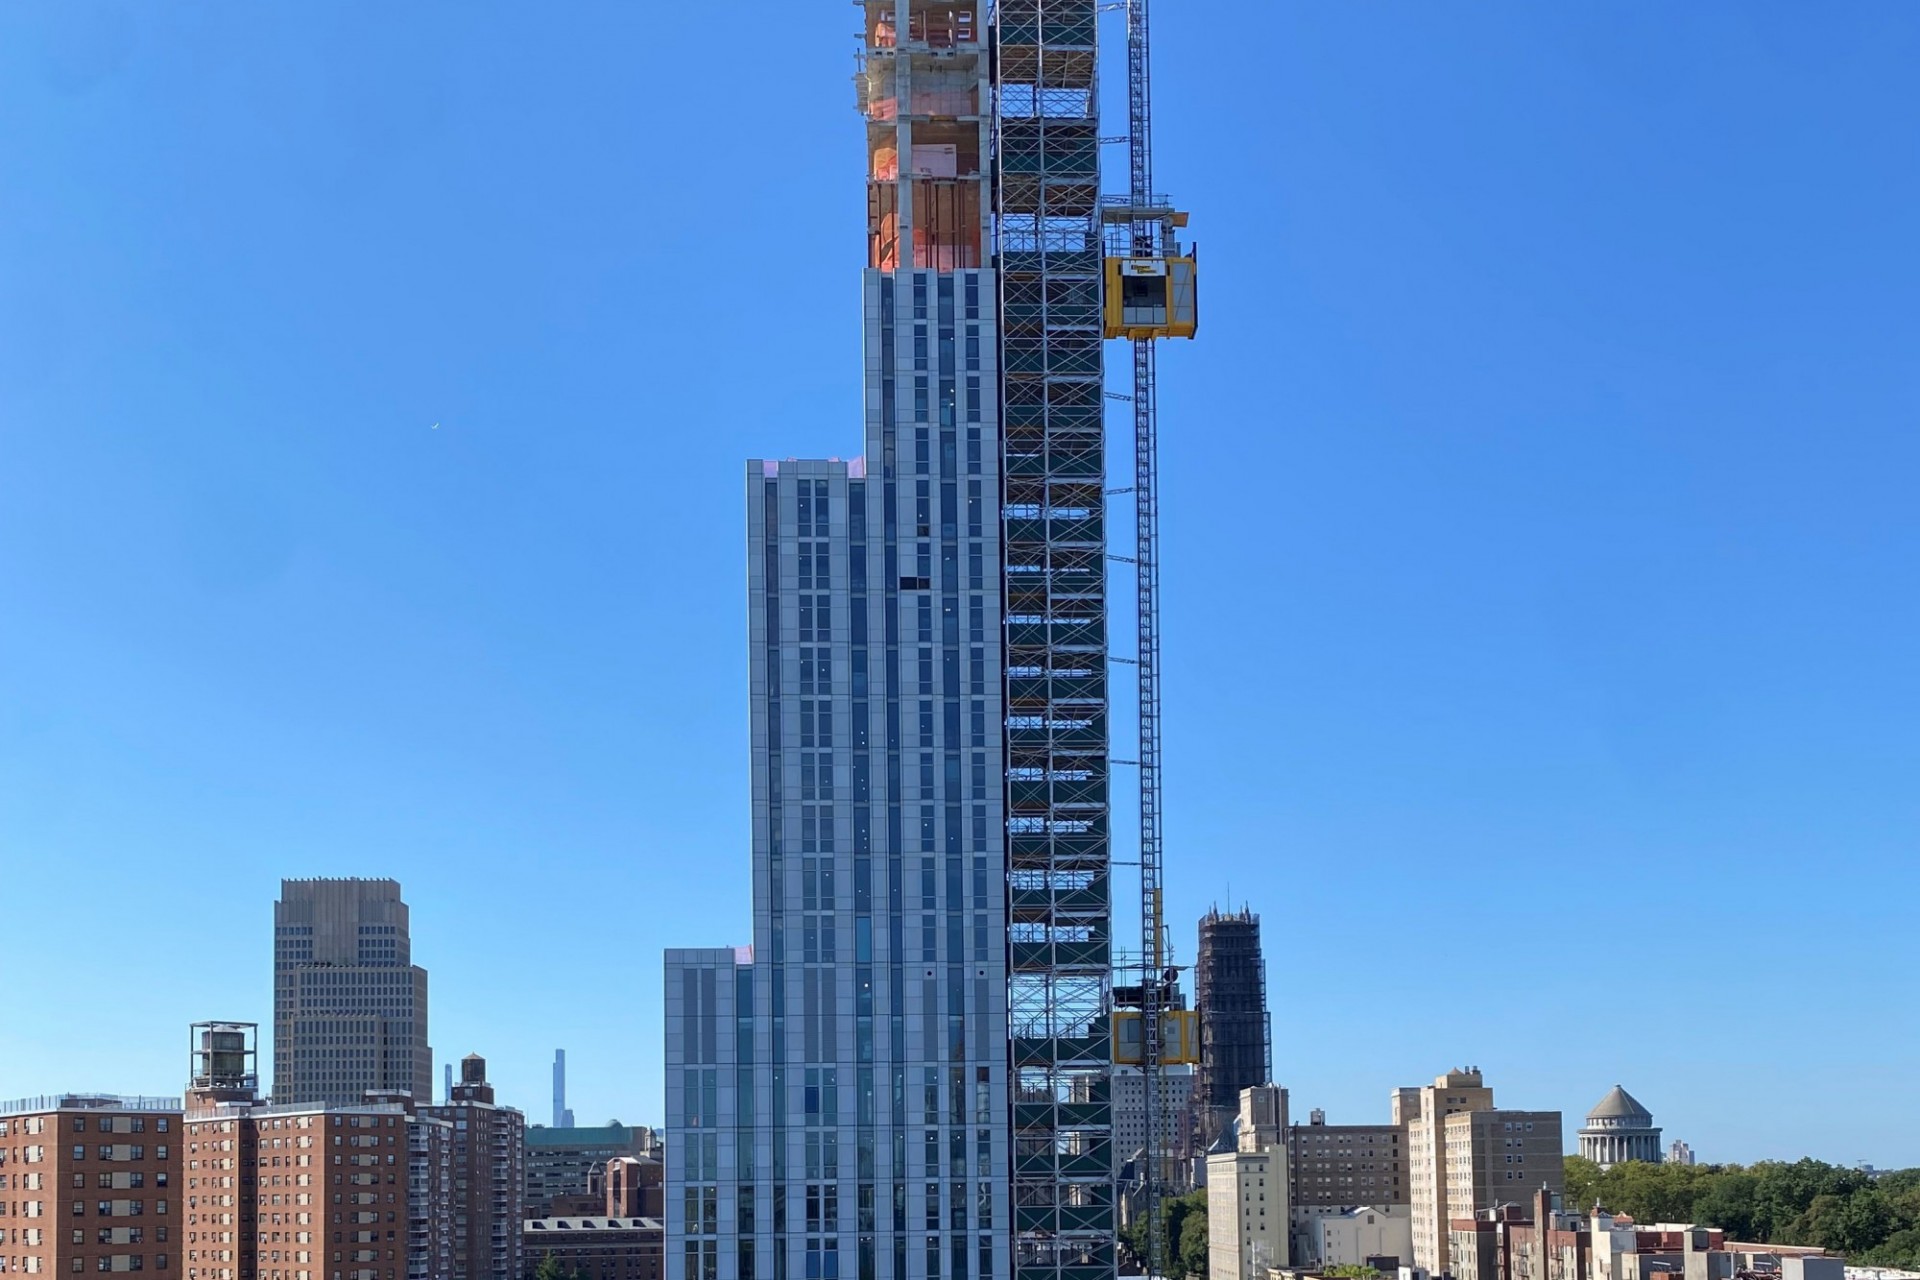 A view of the top floors of 600 W. 125th Street with the Upper West Side in the background.